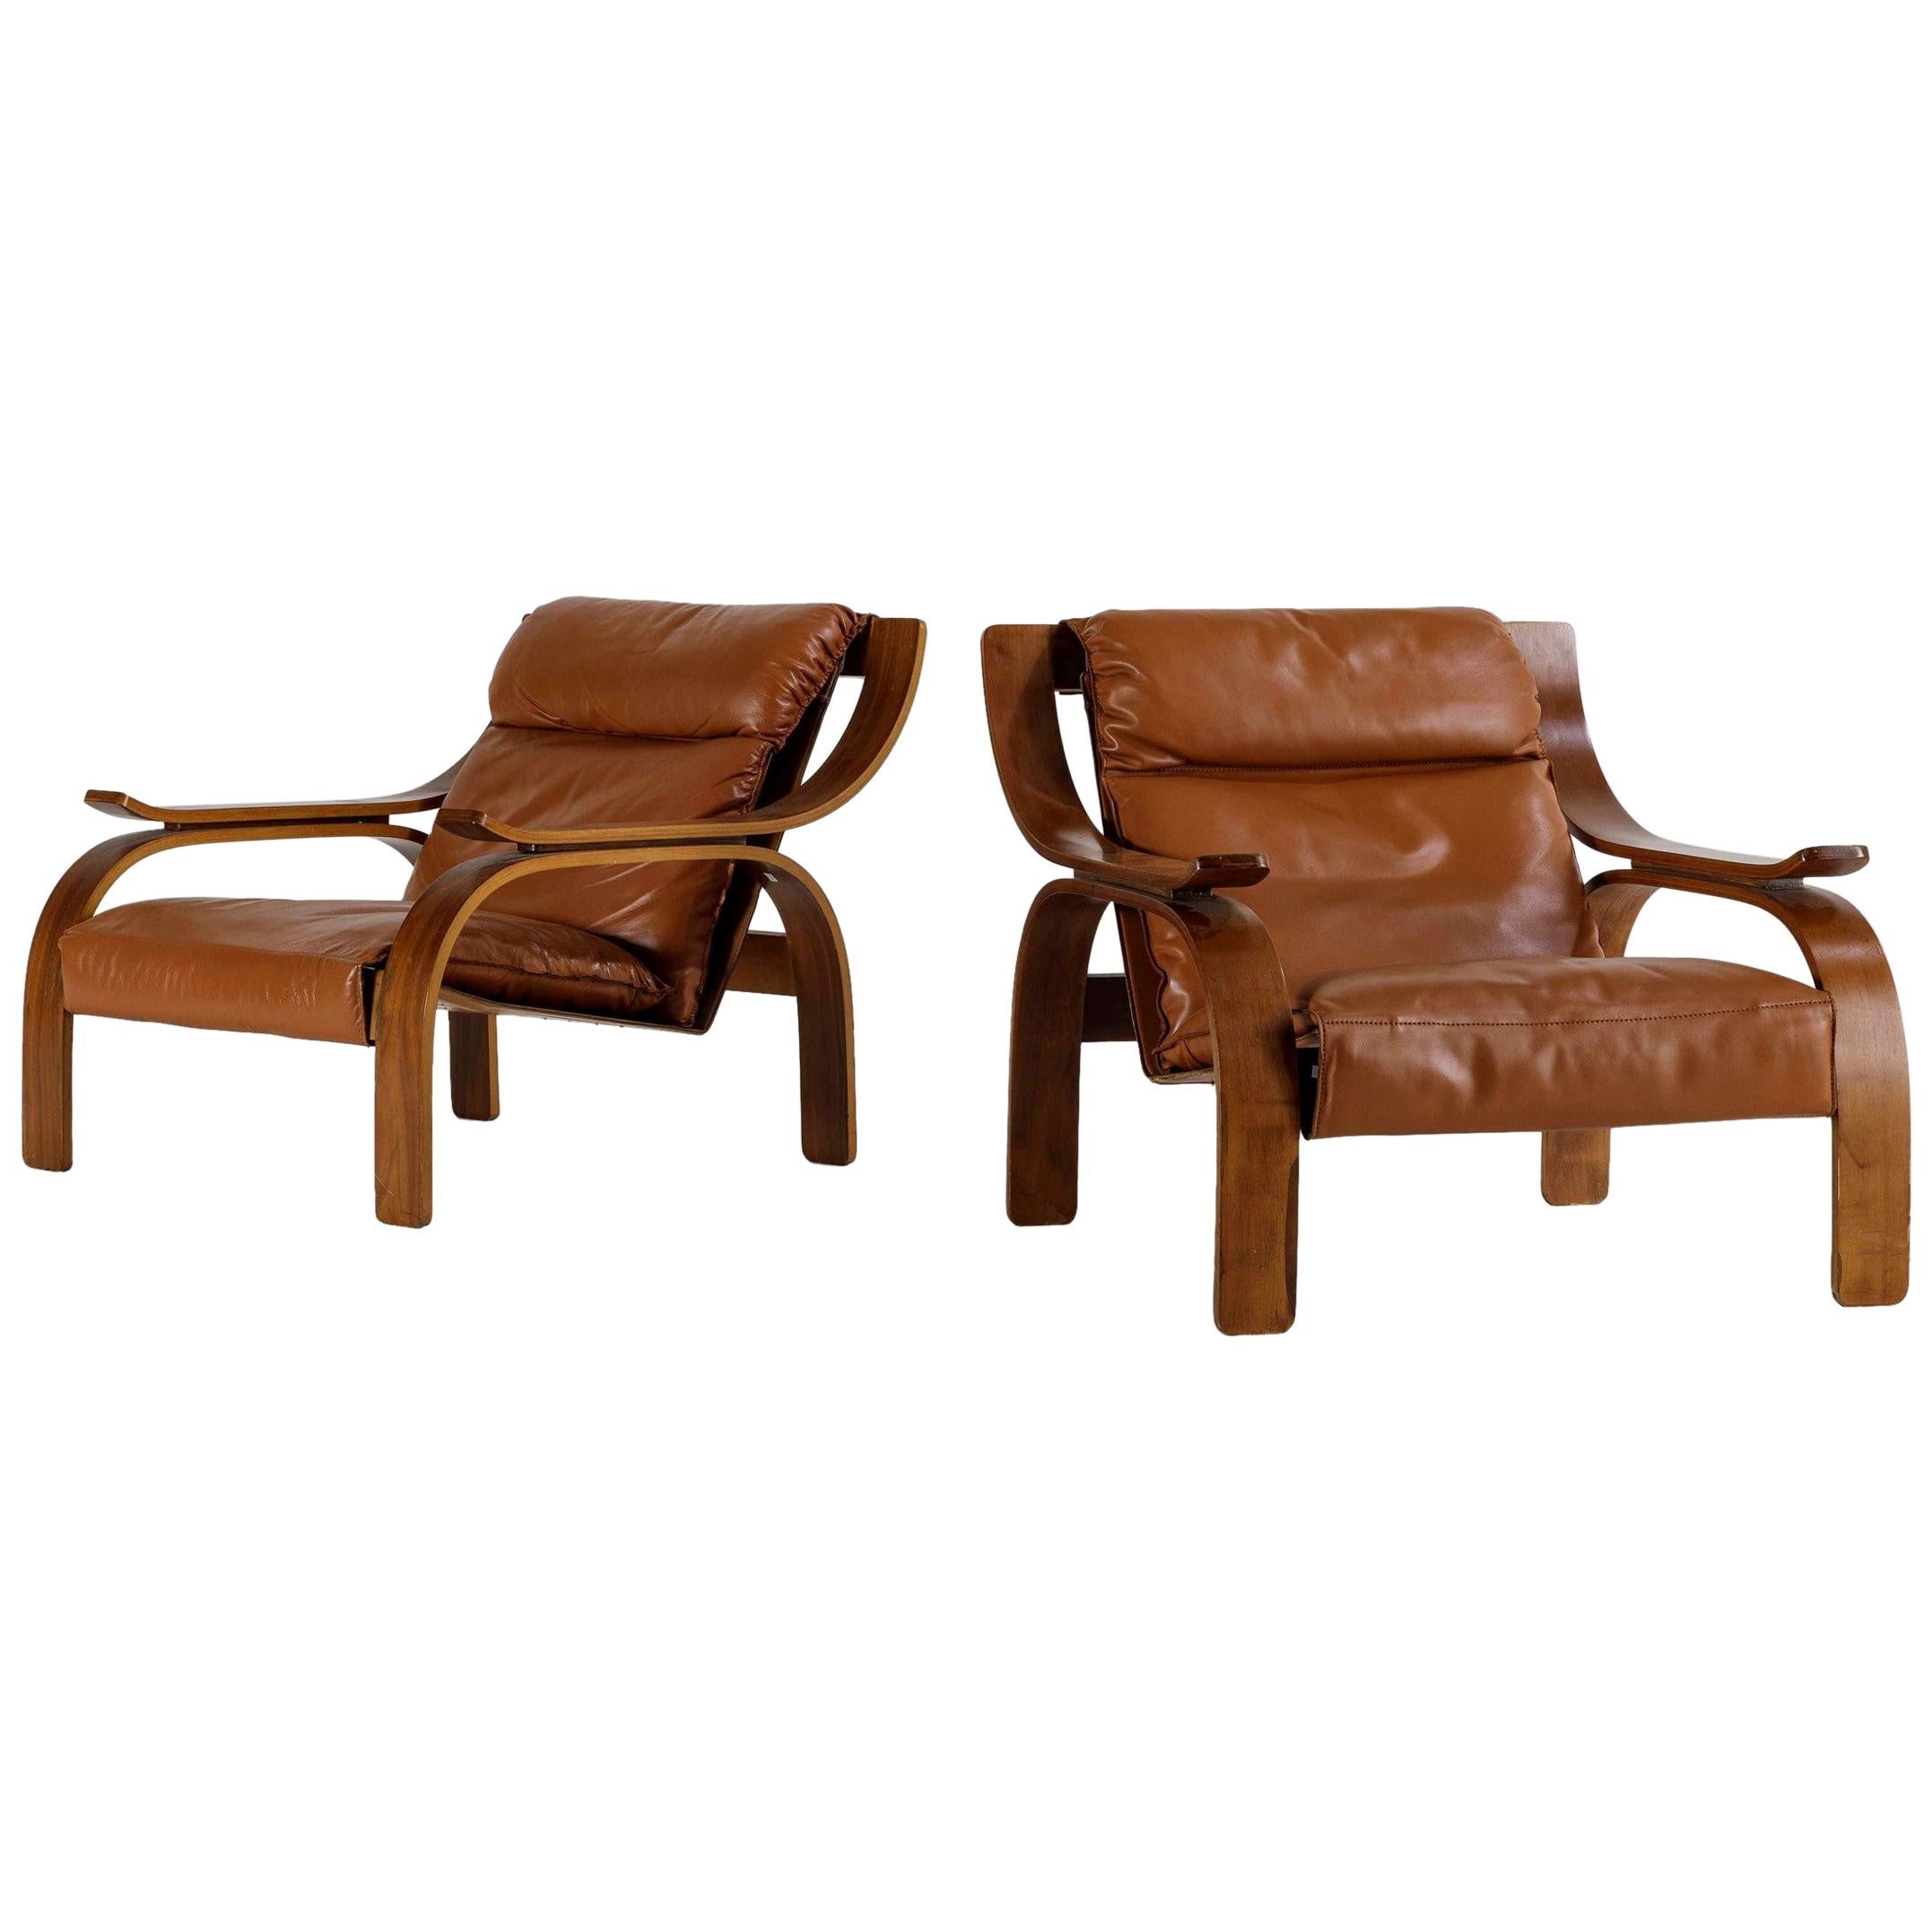 Marco Zanuso Set of Two Woodline Armchairs in Leather for Artflex, 1960